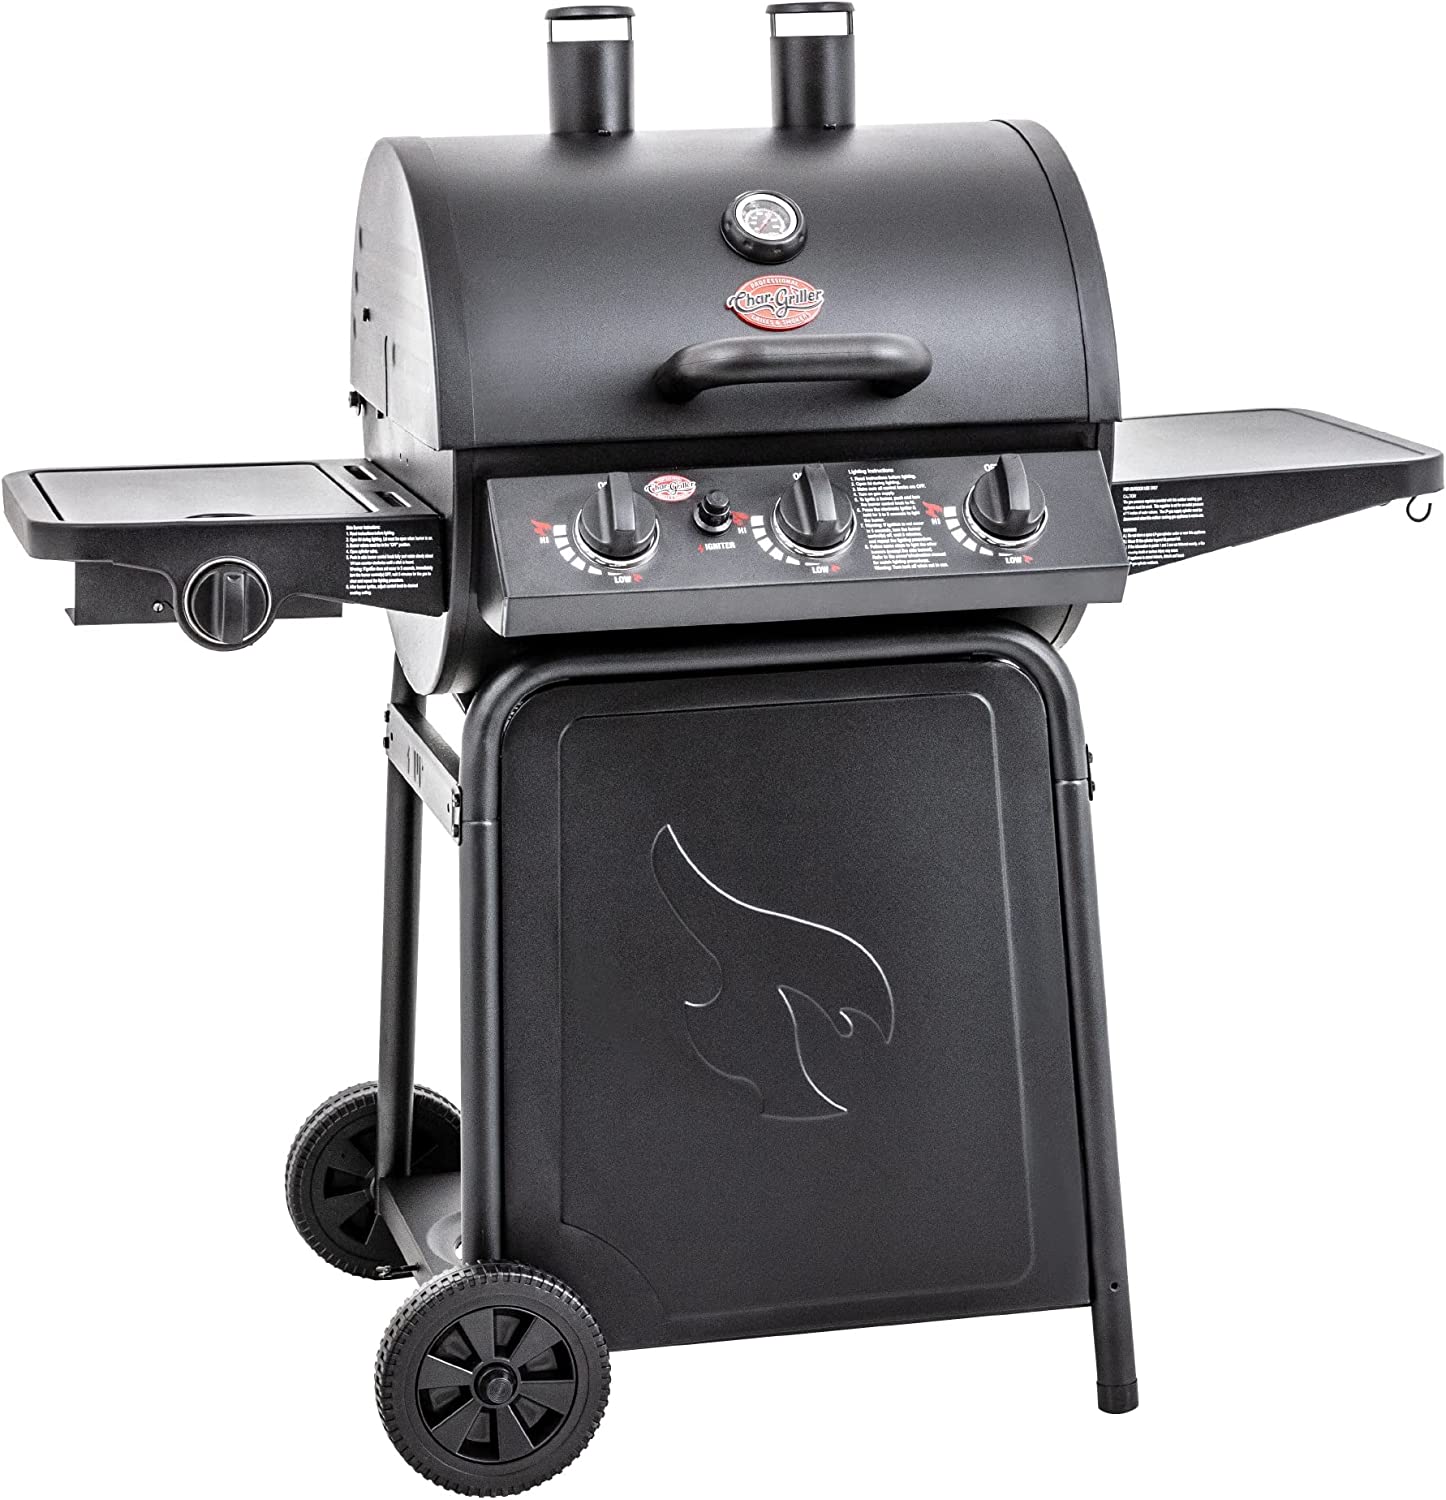 Char-Griller Grillin’ Pro Powder Coated BBQ Grill